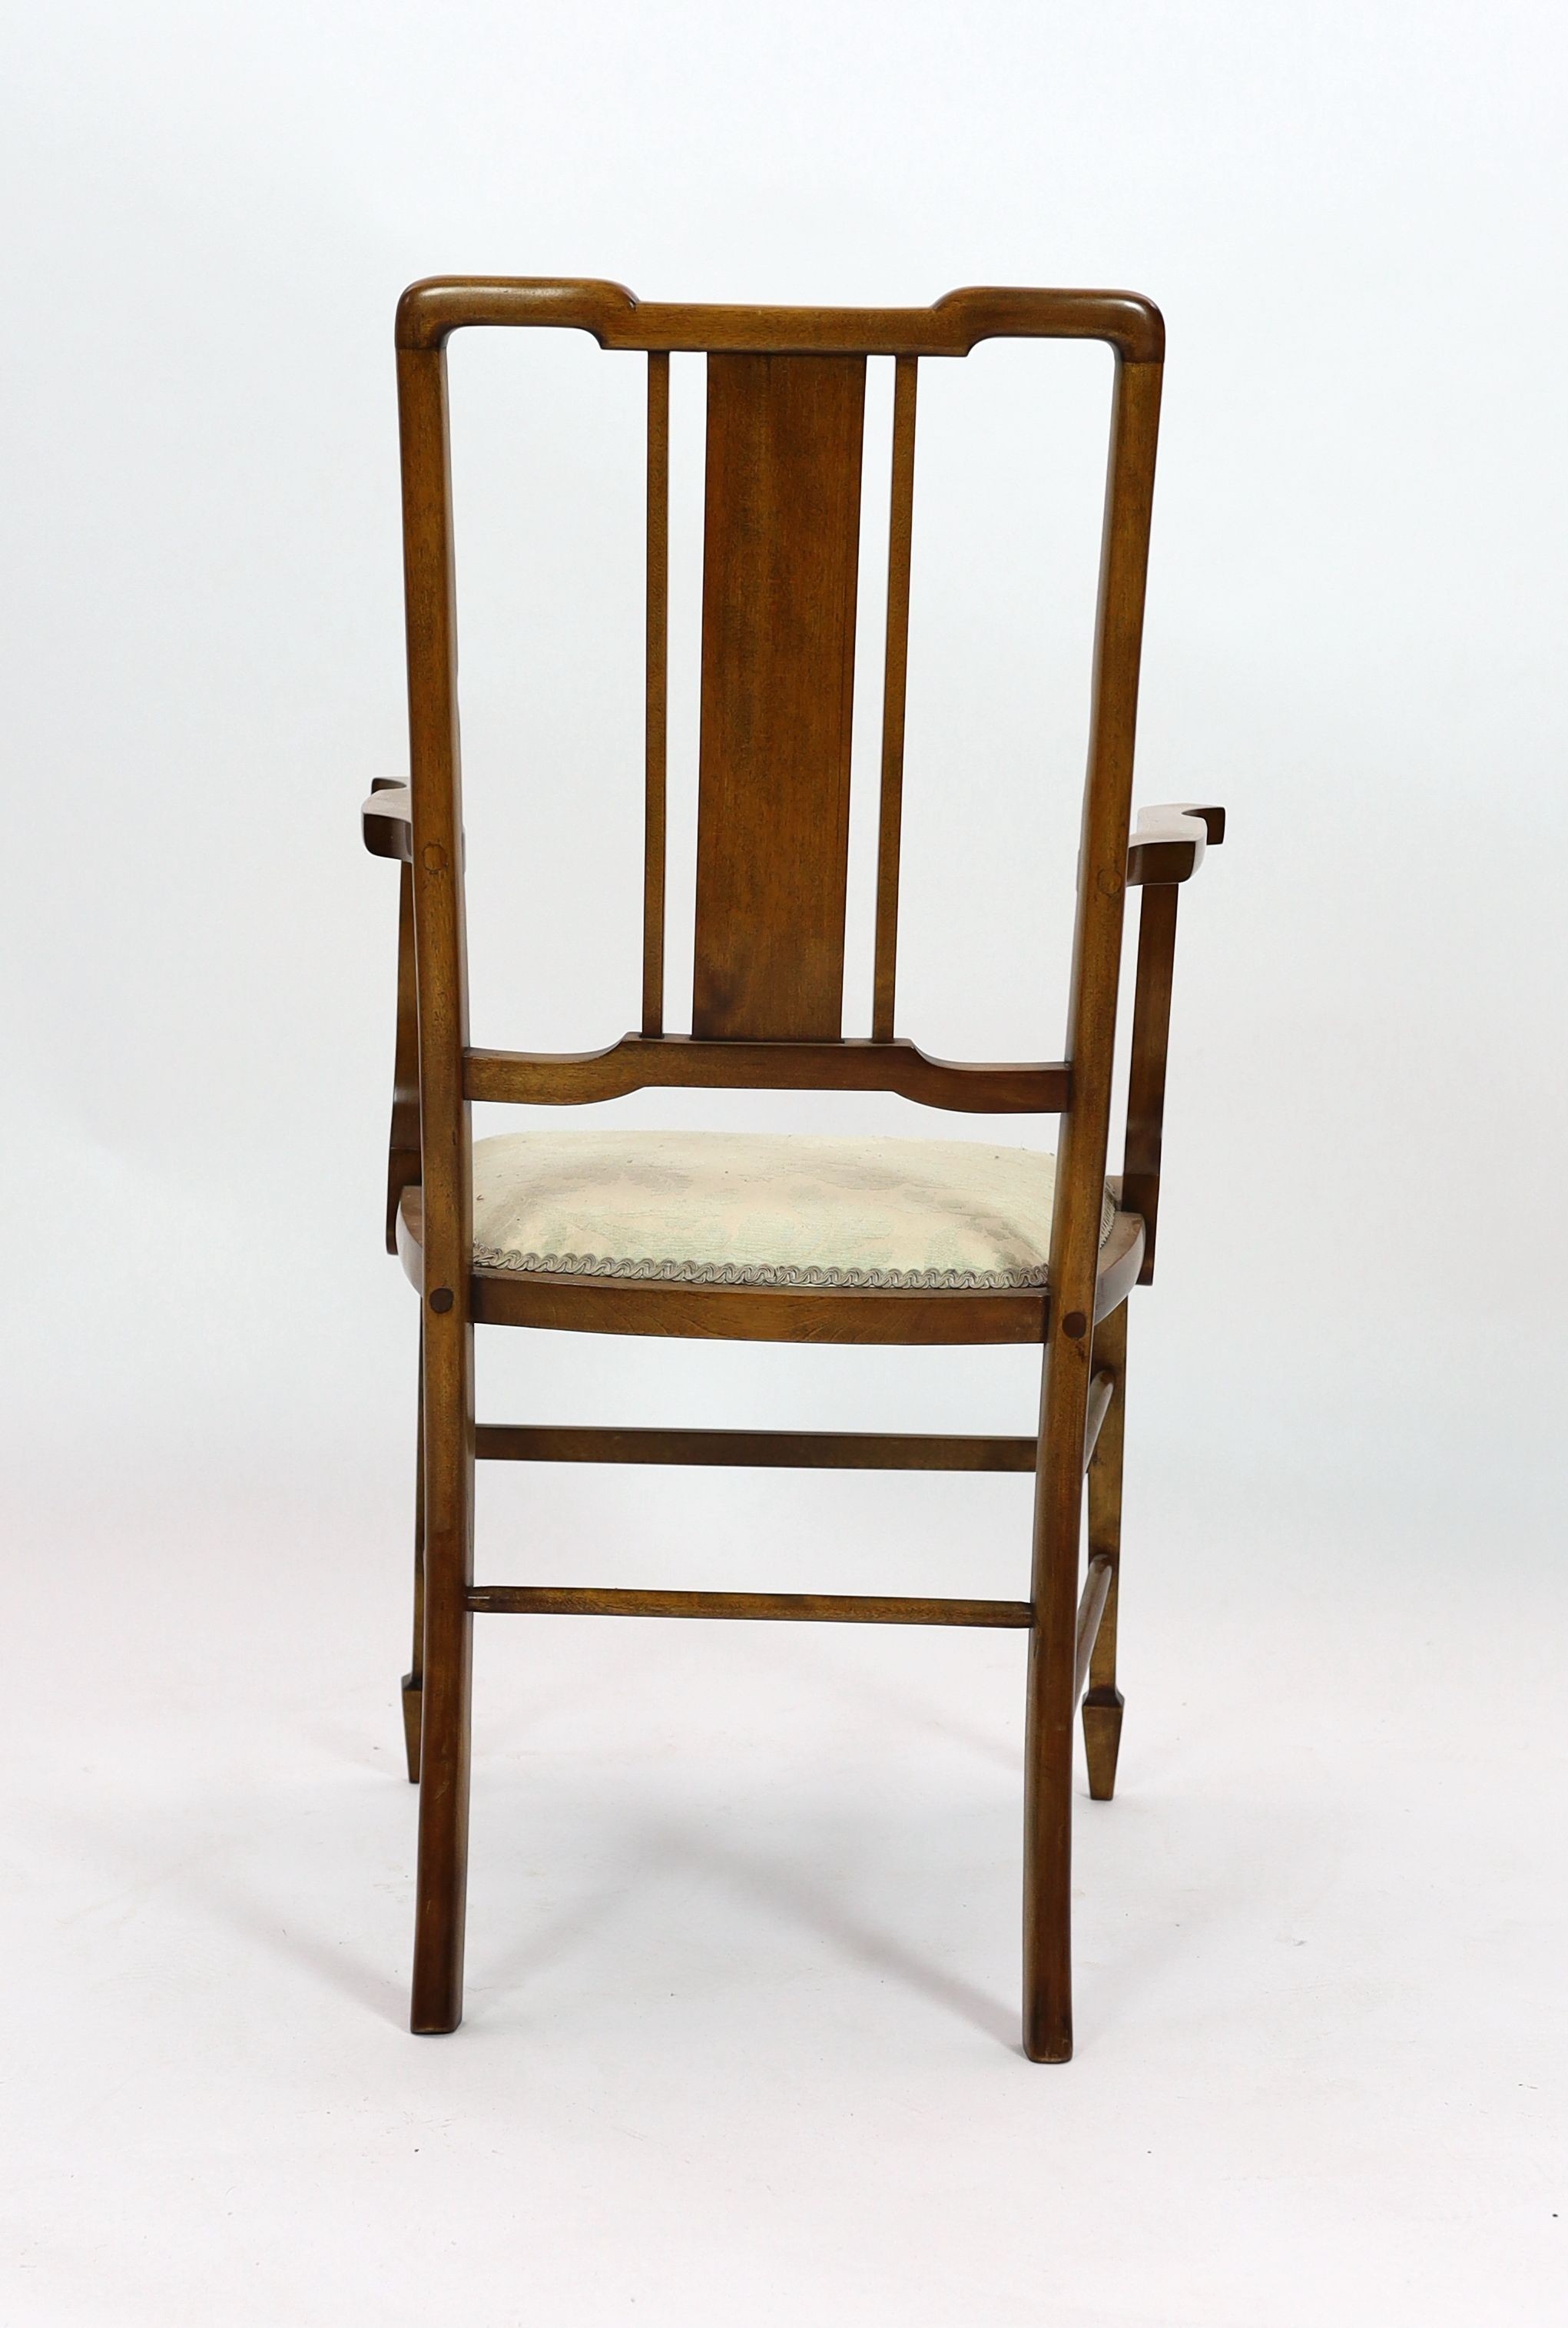 An Edwardian inlaid mahogany elbow chair, width 51cm depth 45cm height 96cm, and two Edwardian dining chairs